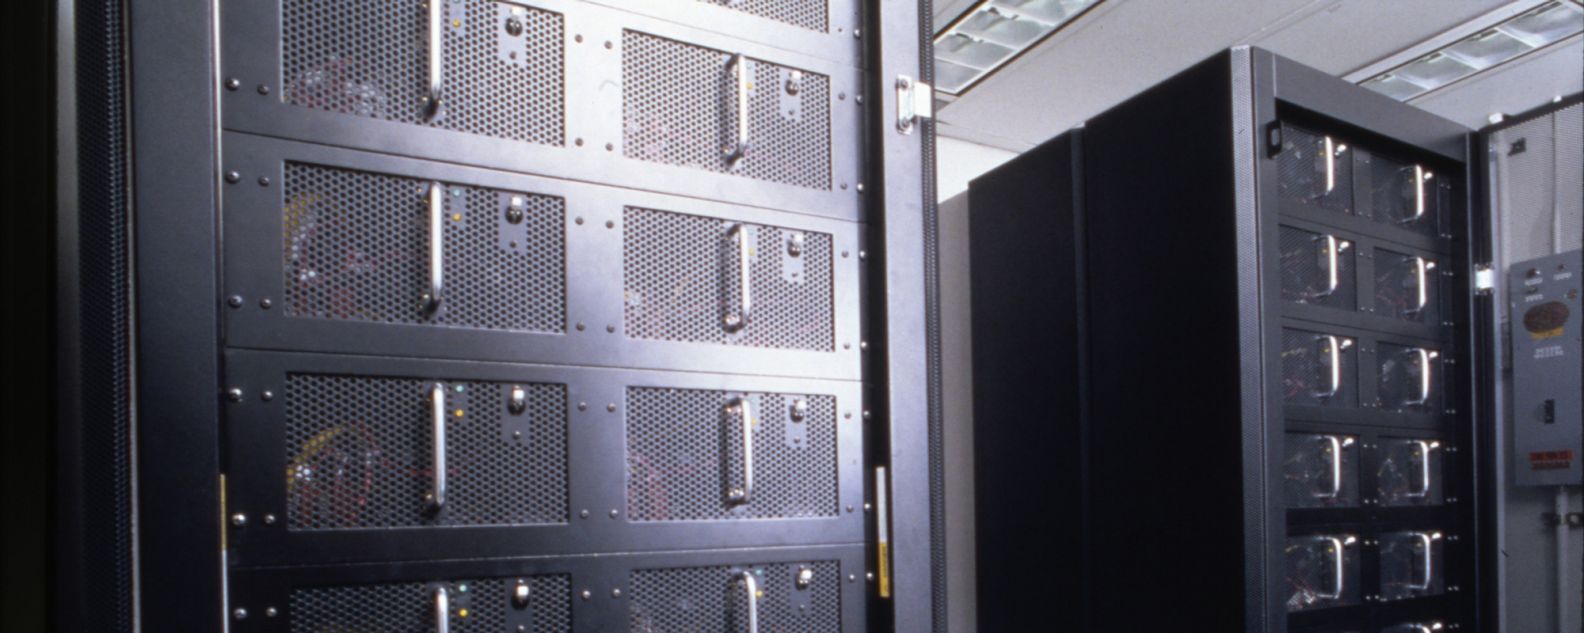 Close-up shot of two of Deep Blue's processor cabinets in a server room, mid-1960s